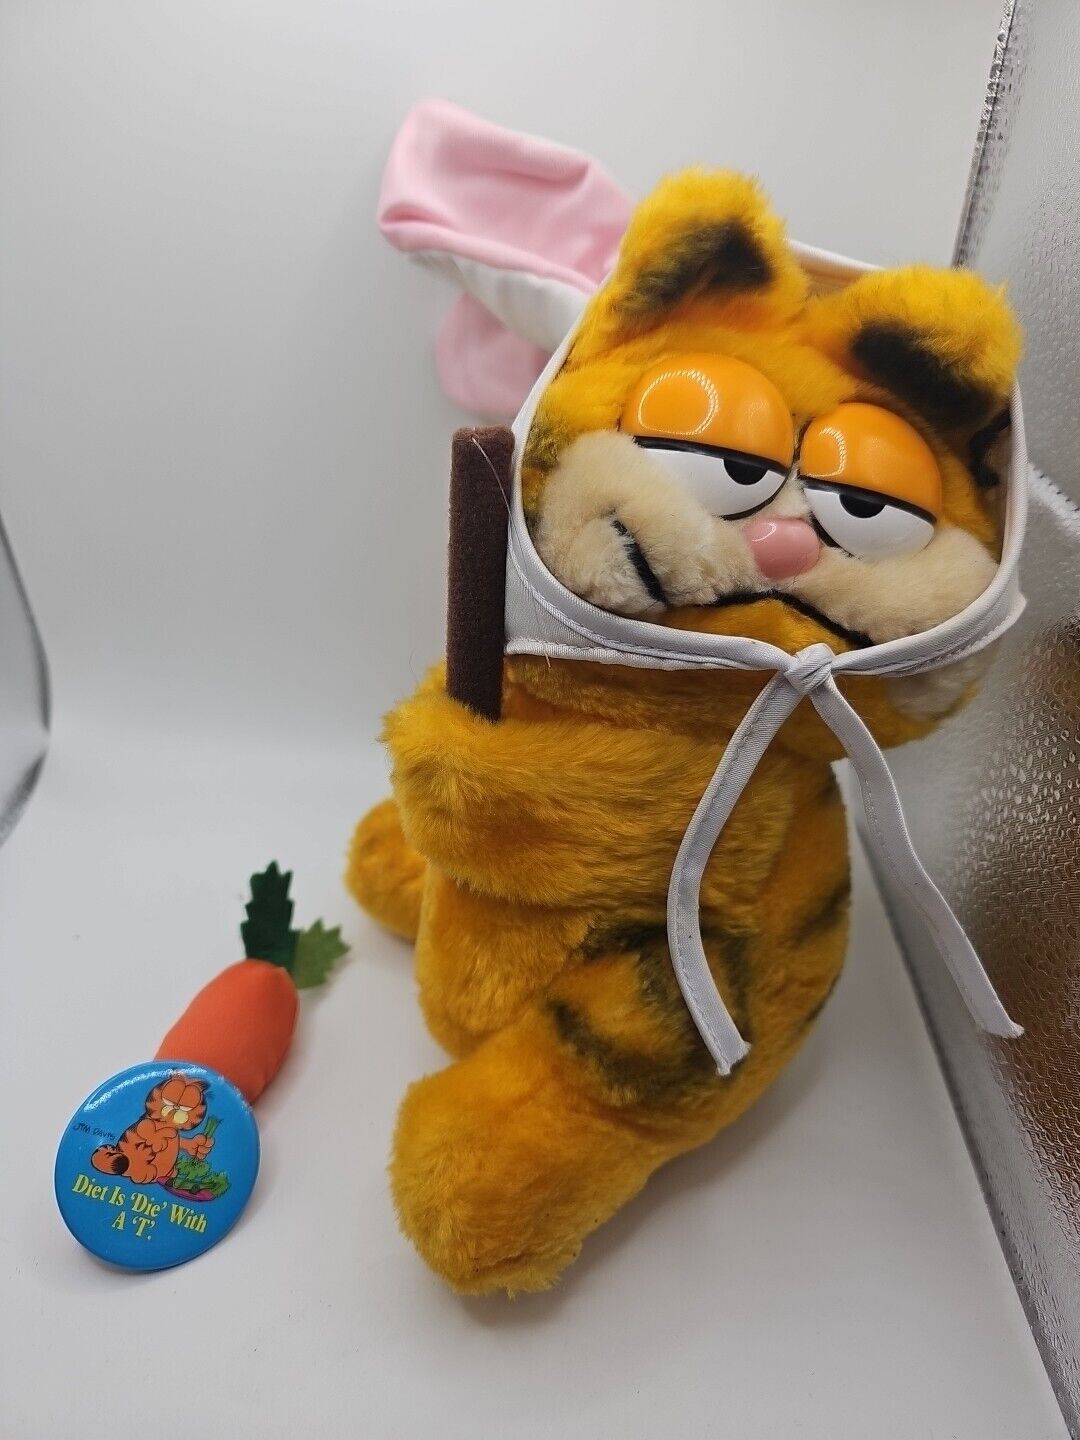 Vintage 1981 Dakin Easter Garfield Plush With Bunny Ears and Carrot